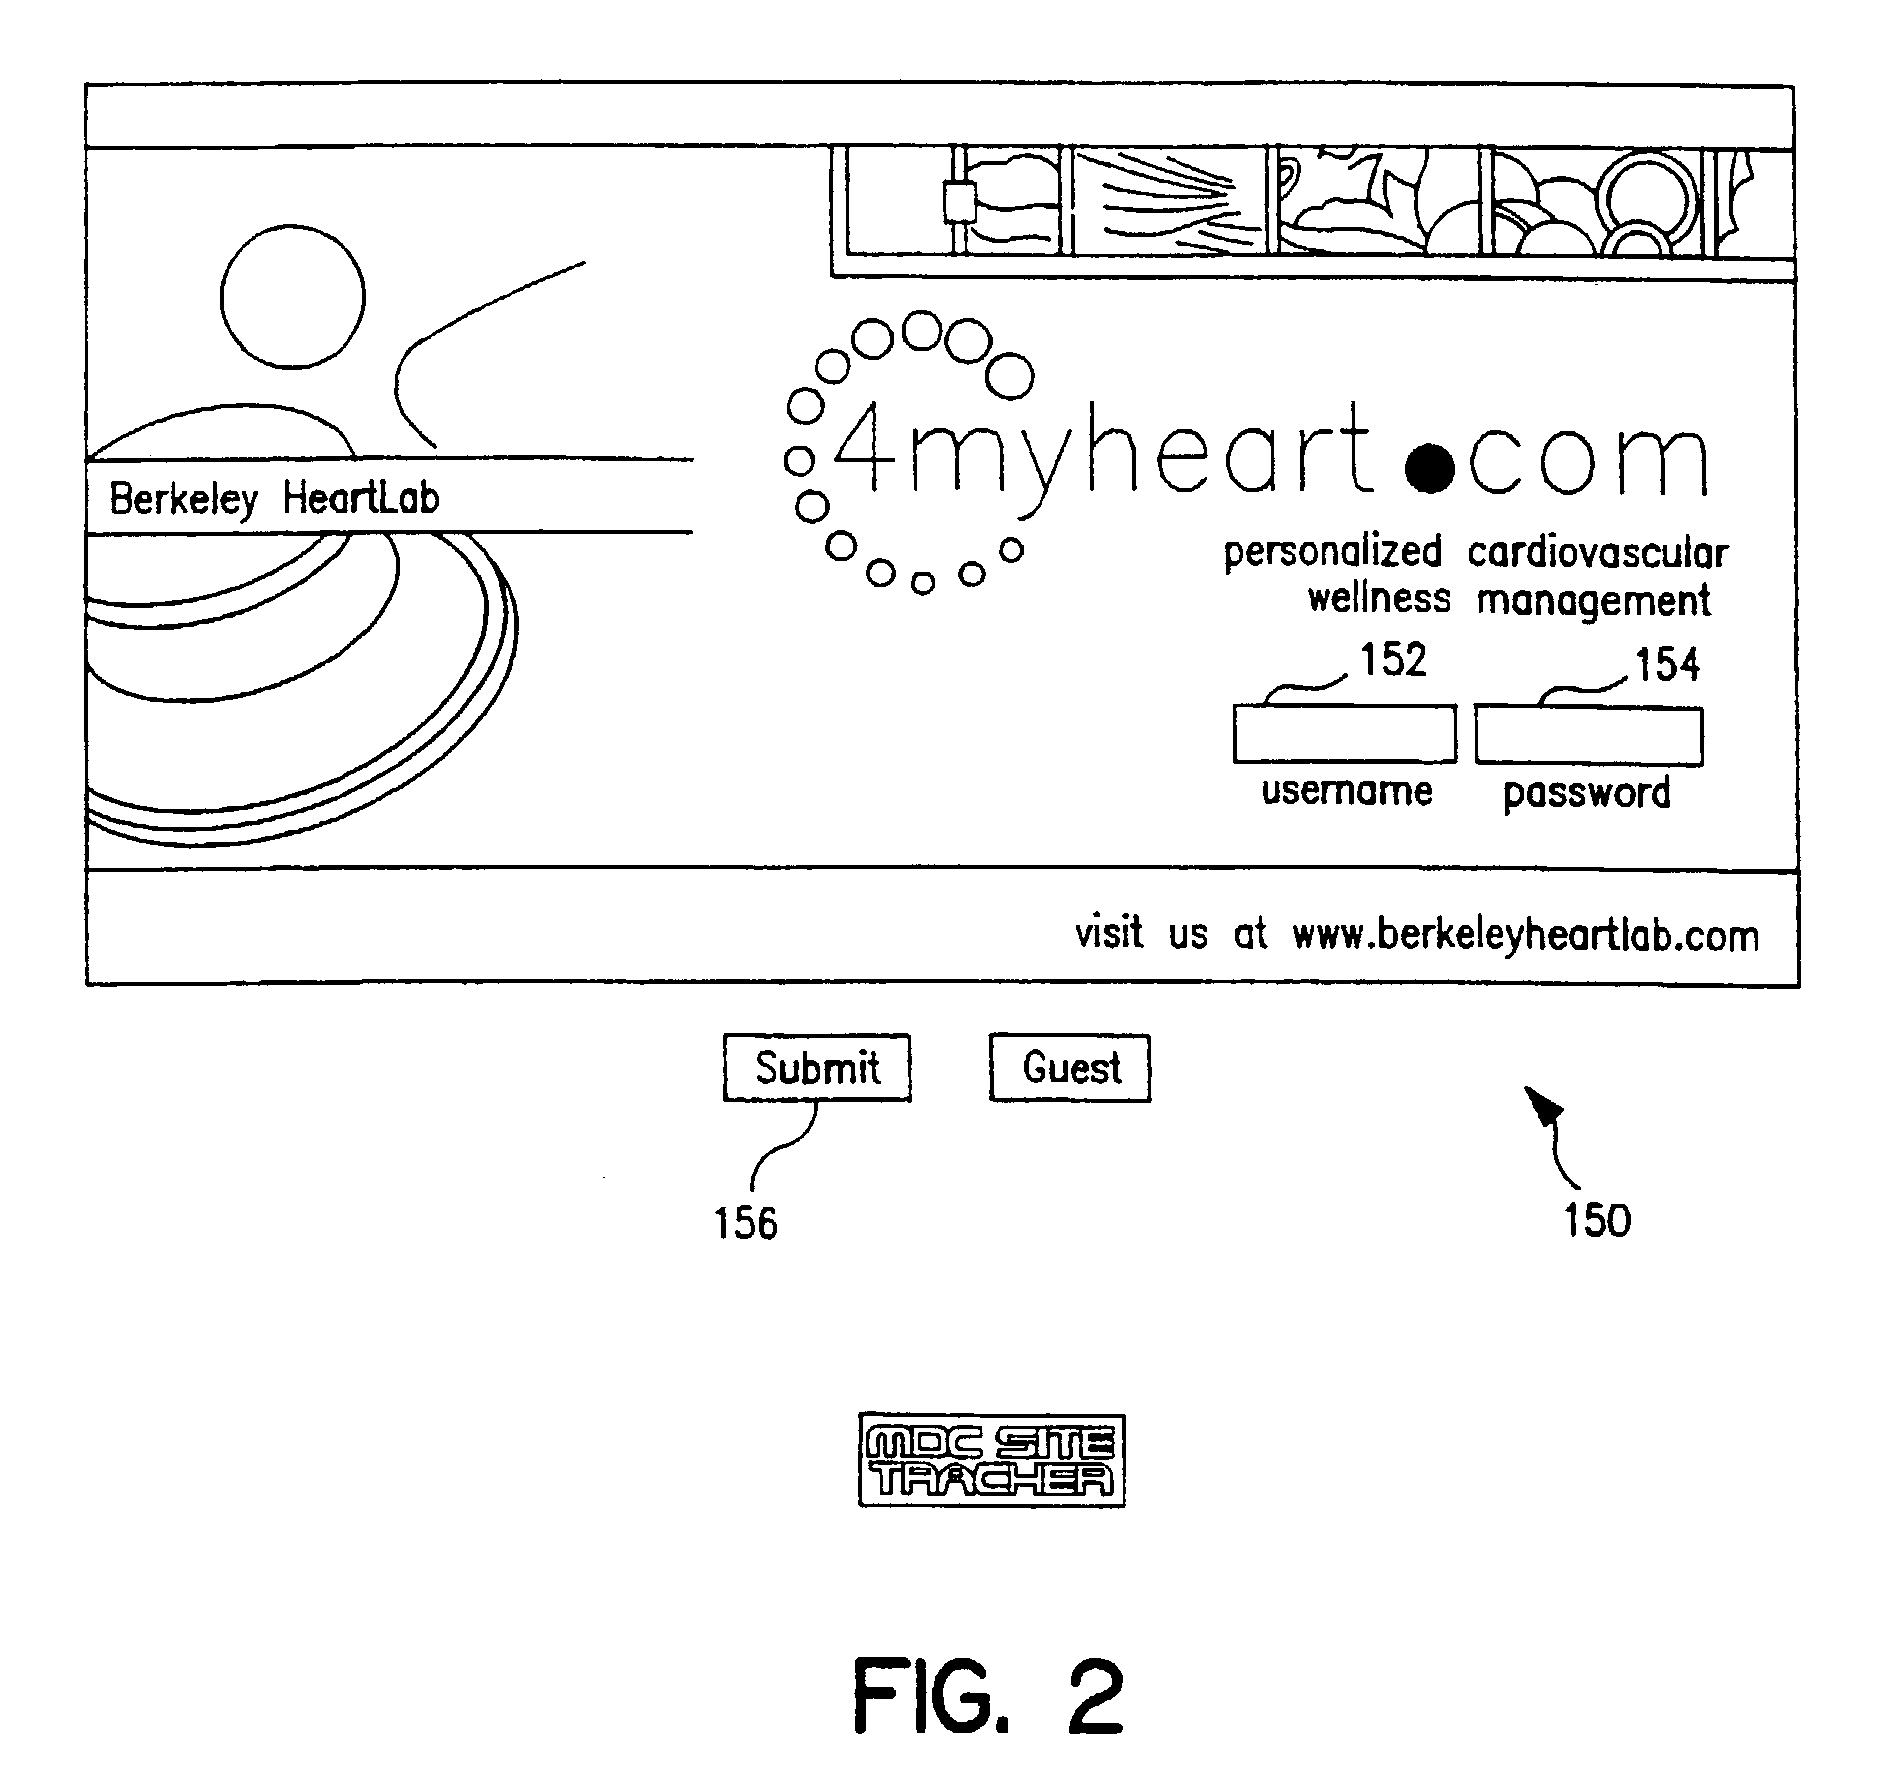 Cardiovascular healthcare management system and method